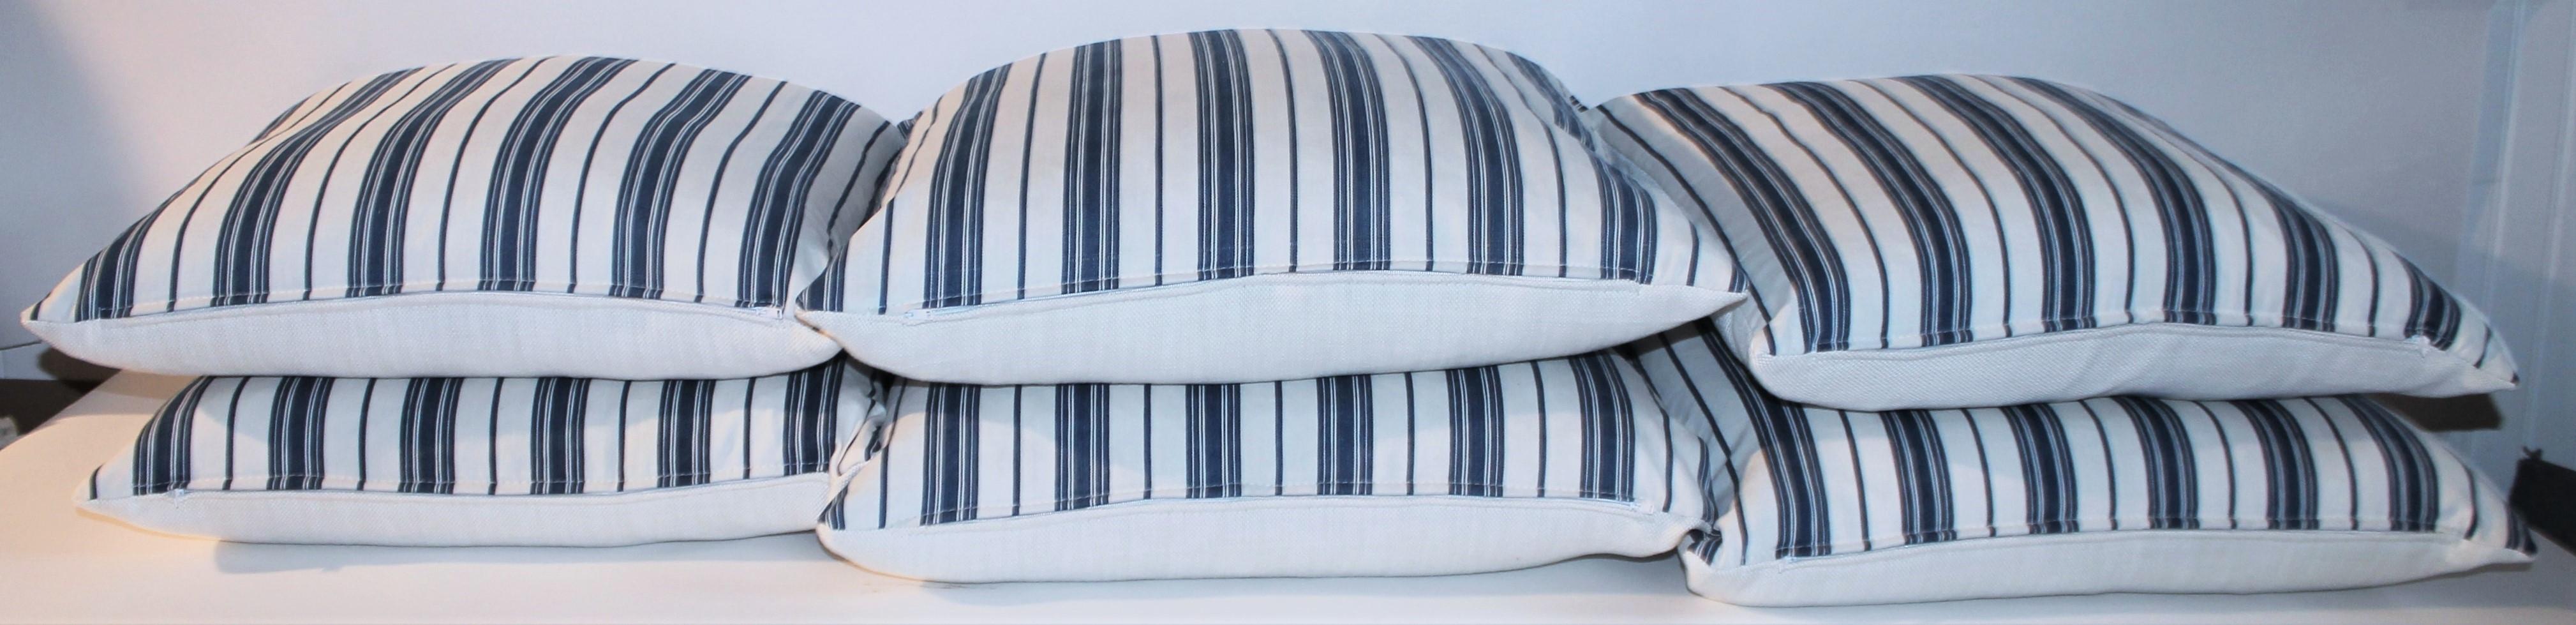 Fantastic 19Thc blue & white ticking pillows with white cotton linen backings. The inserts are down & feather fill. Two pairs in stock of 20 x 20 & two pairs of 22 x 22 in stock. Sold in pairs.